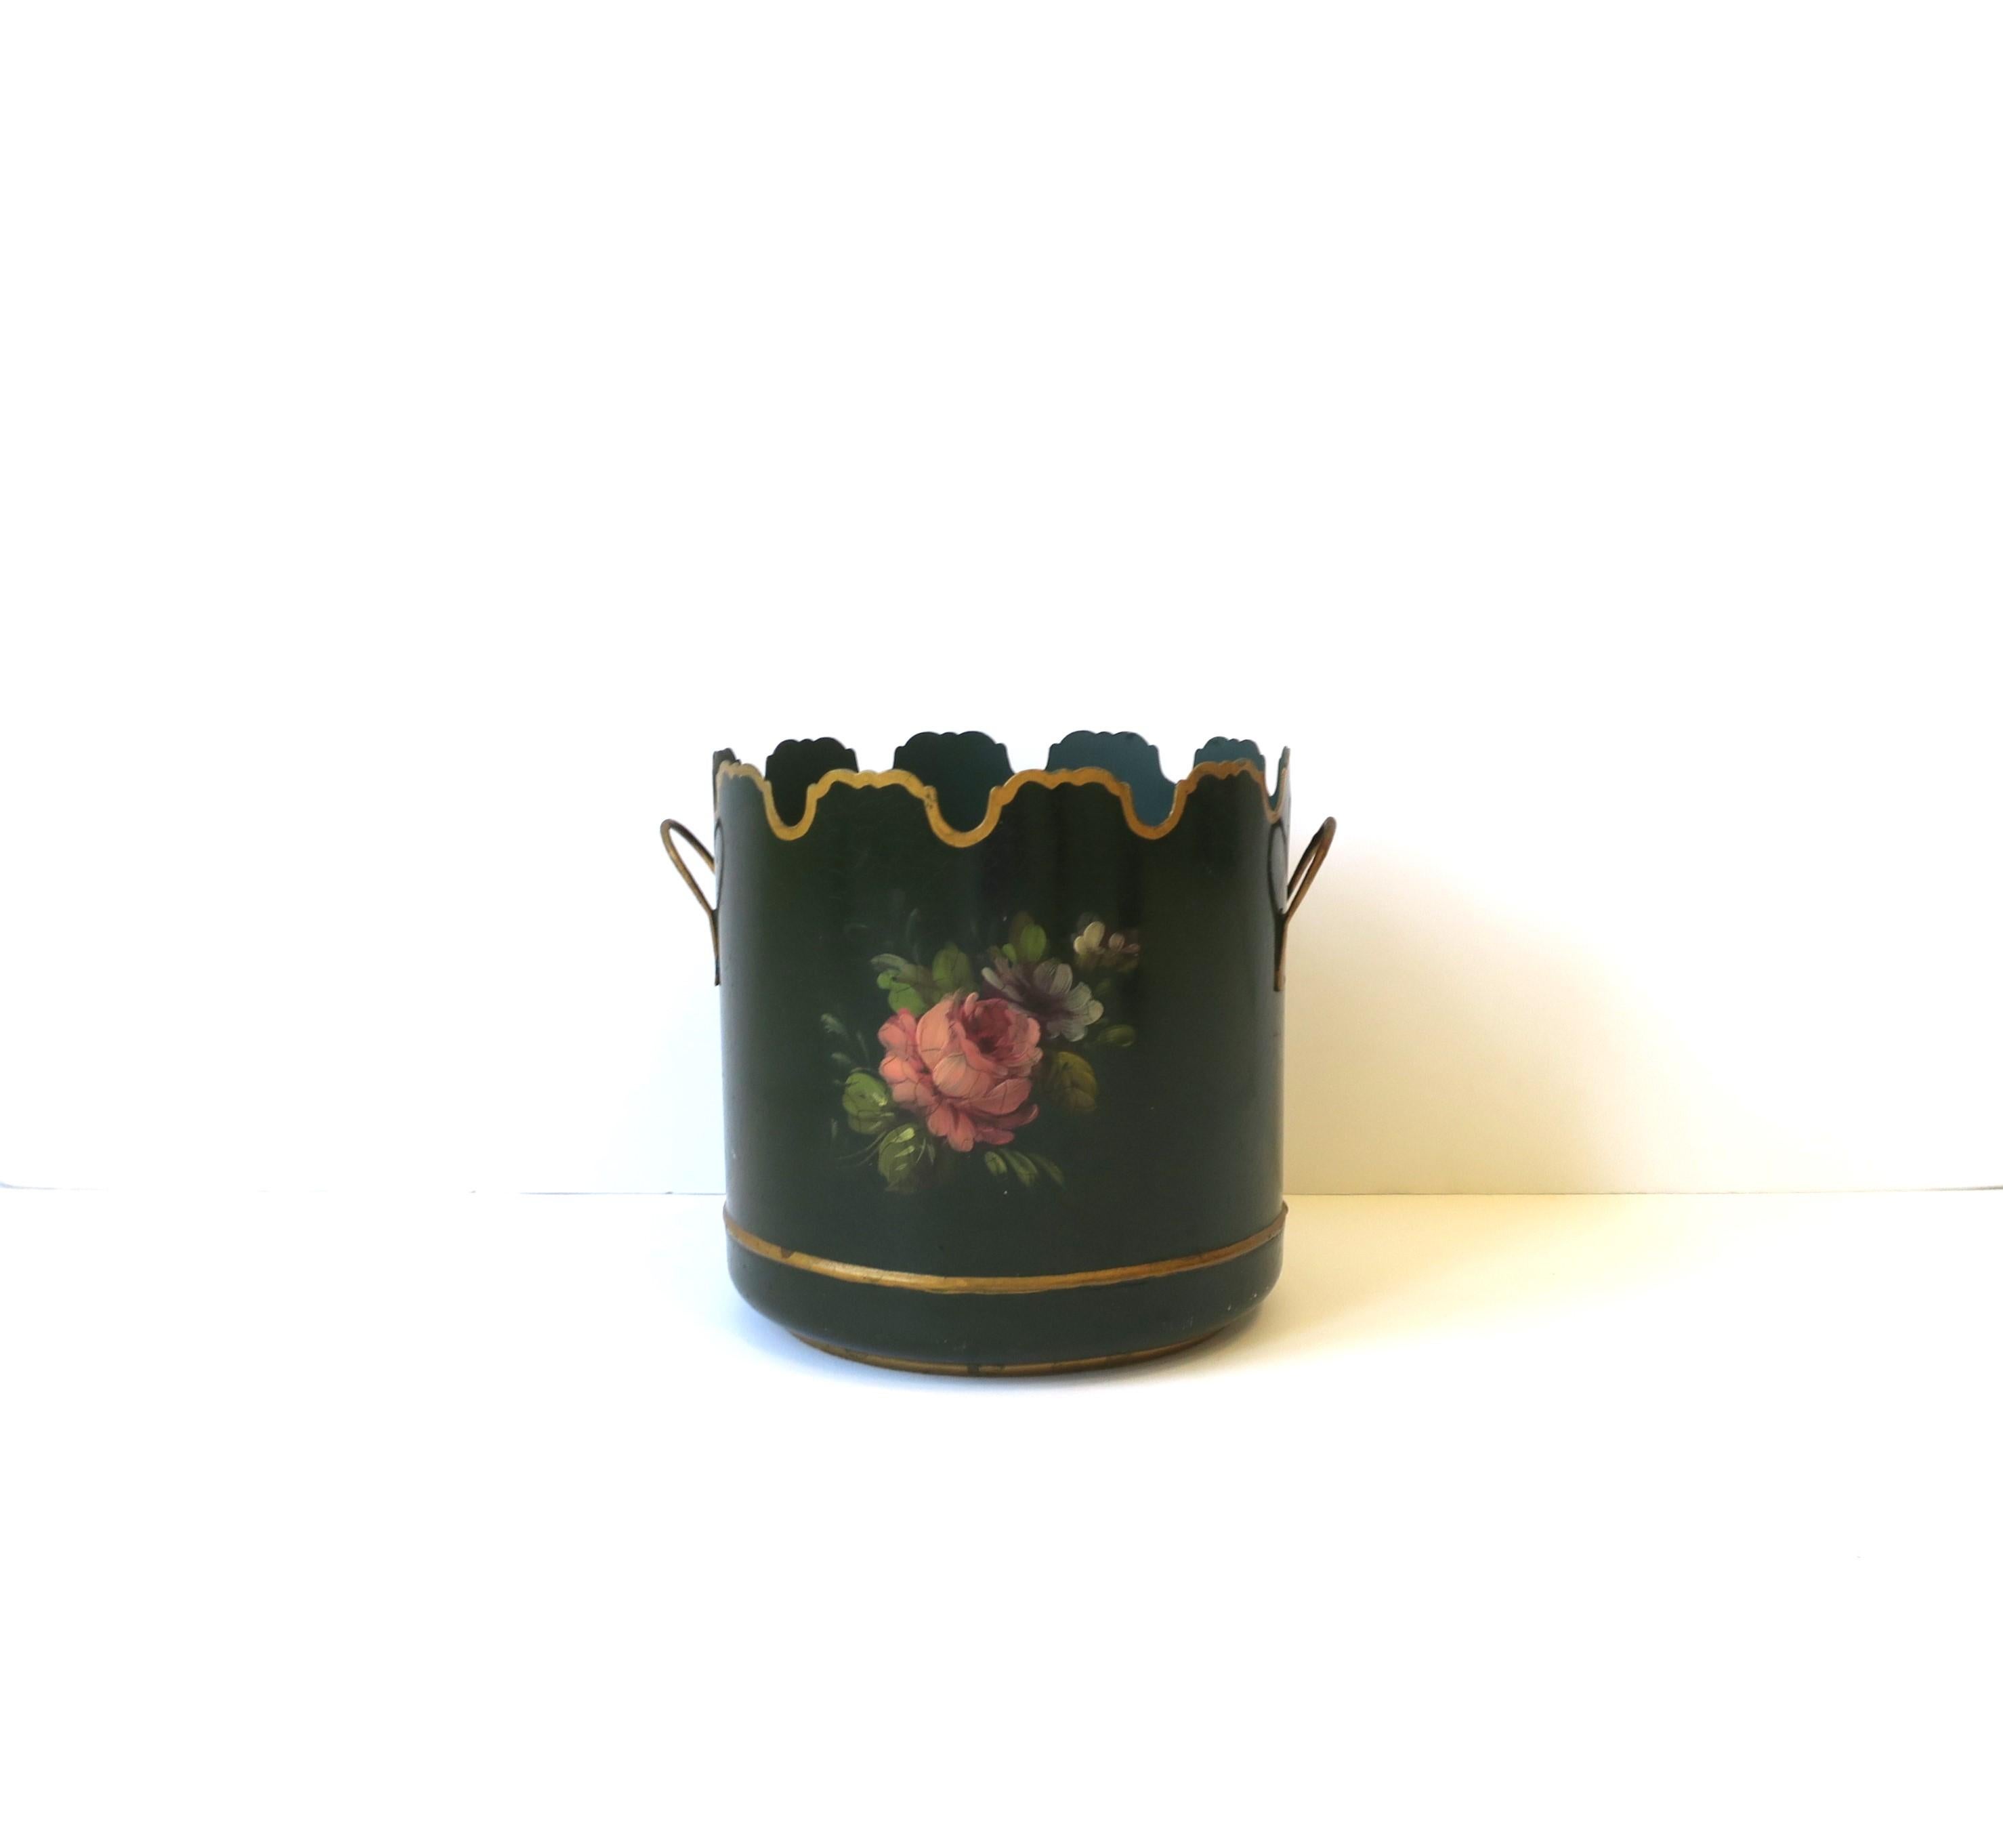 French Planter Jardinière Cachepot Scalloped Edge, 20th c France For Sale 5